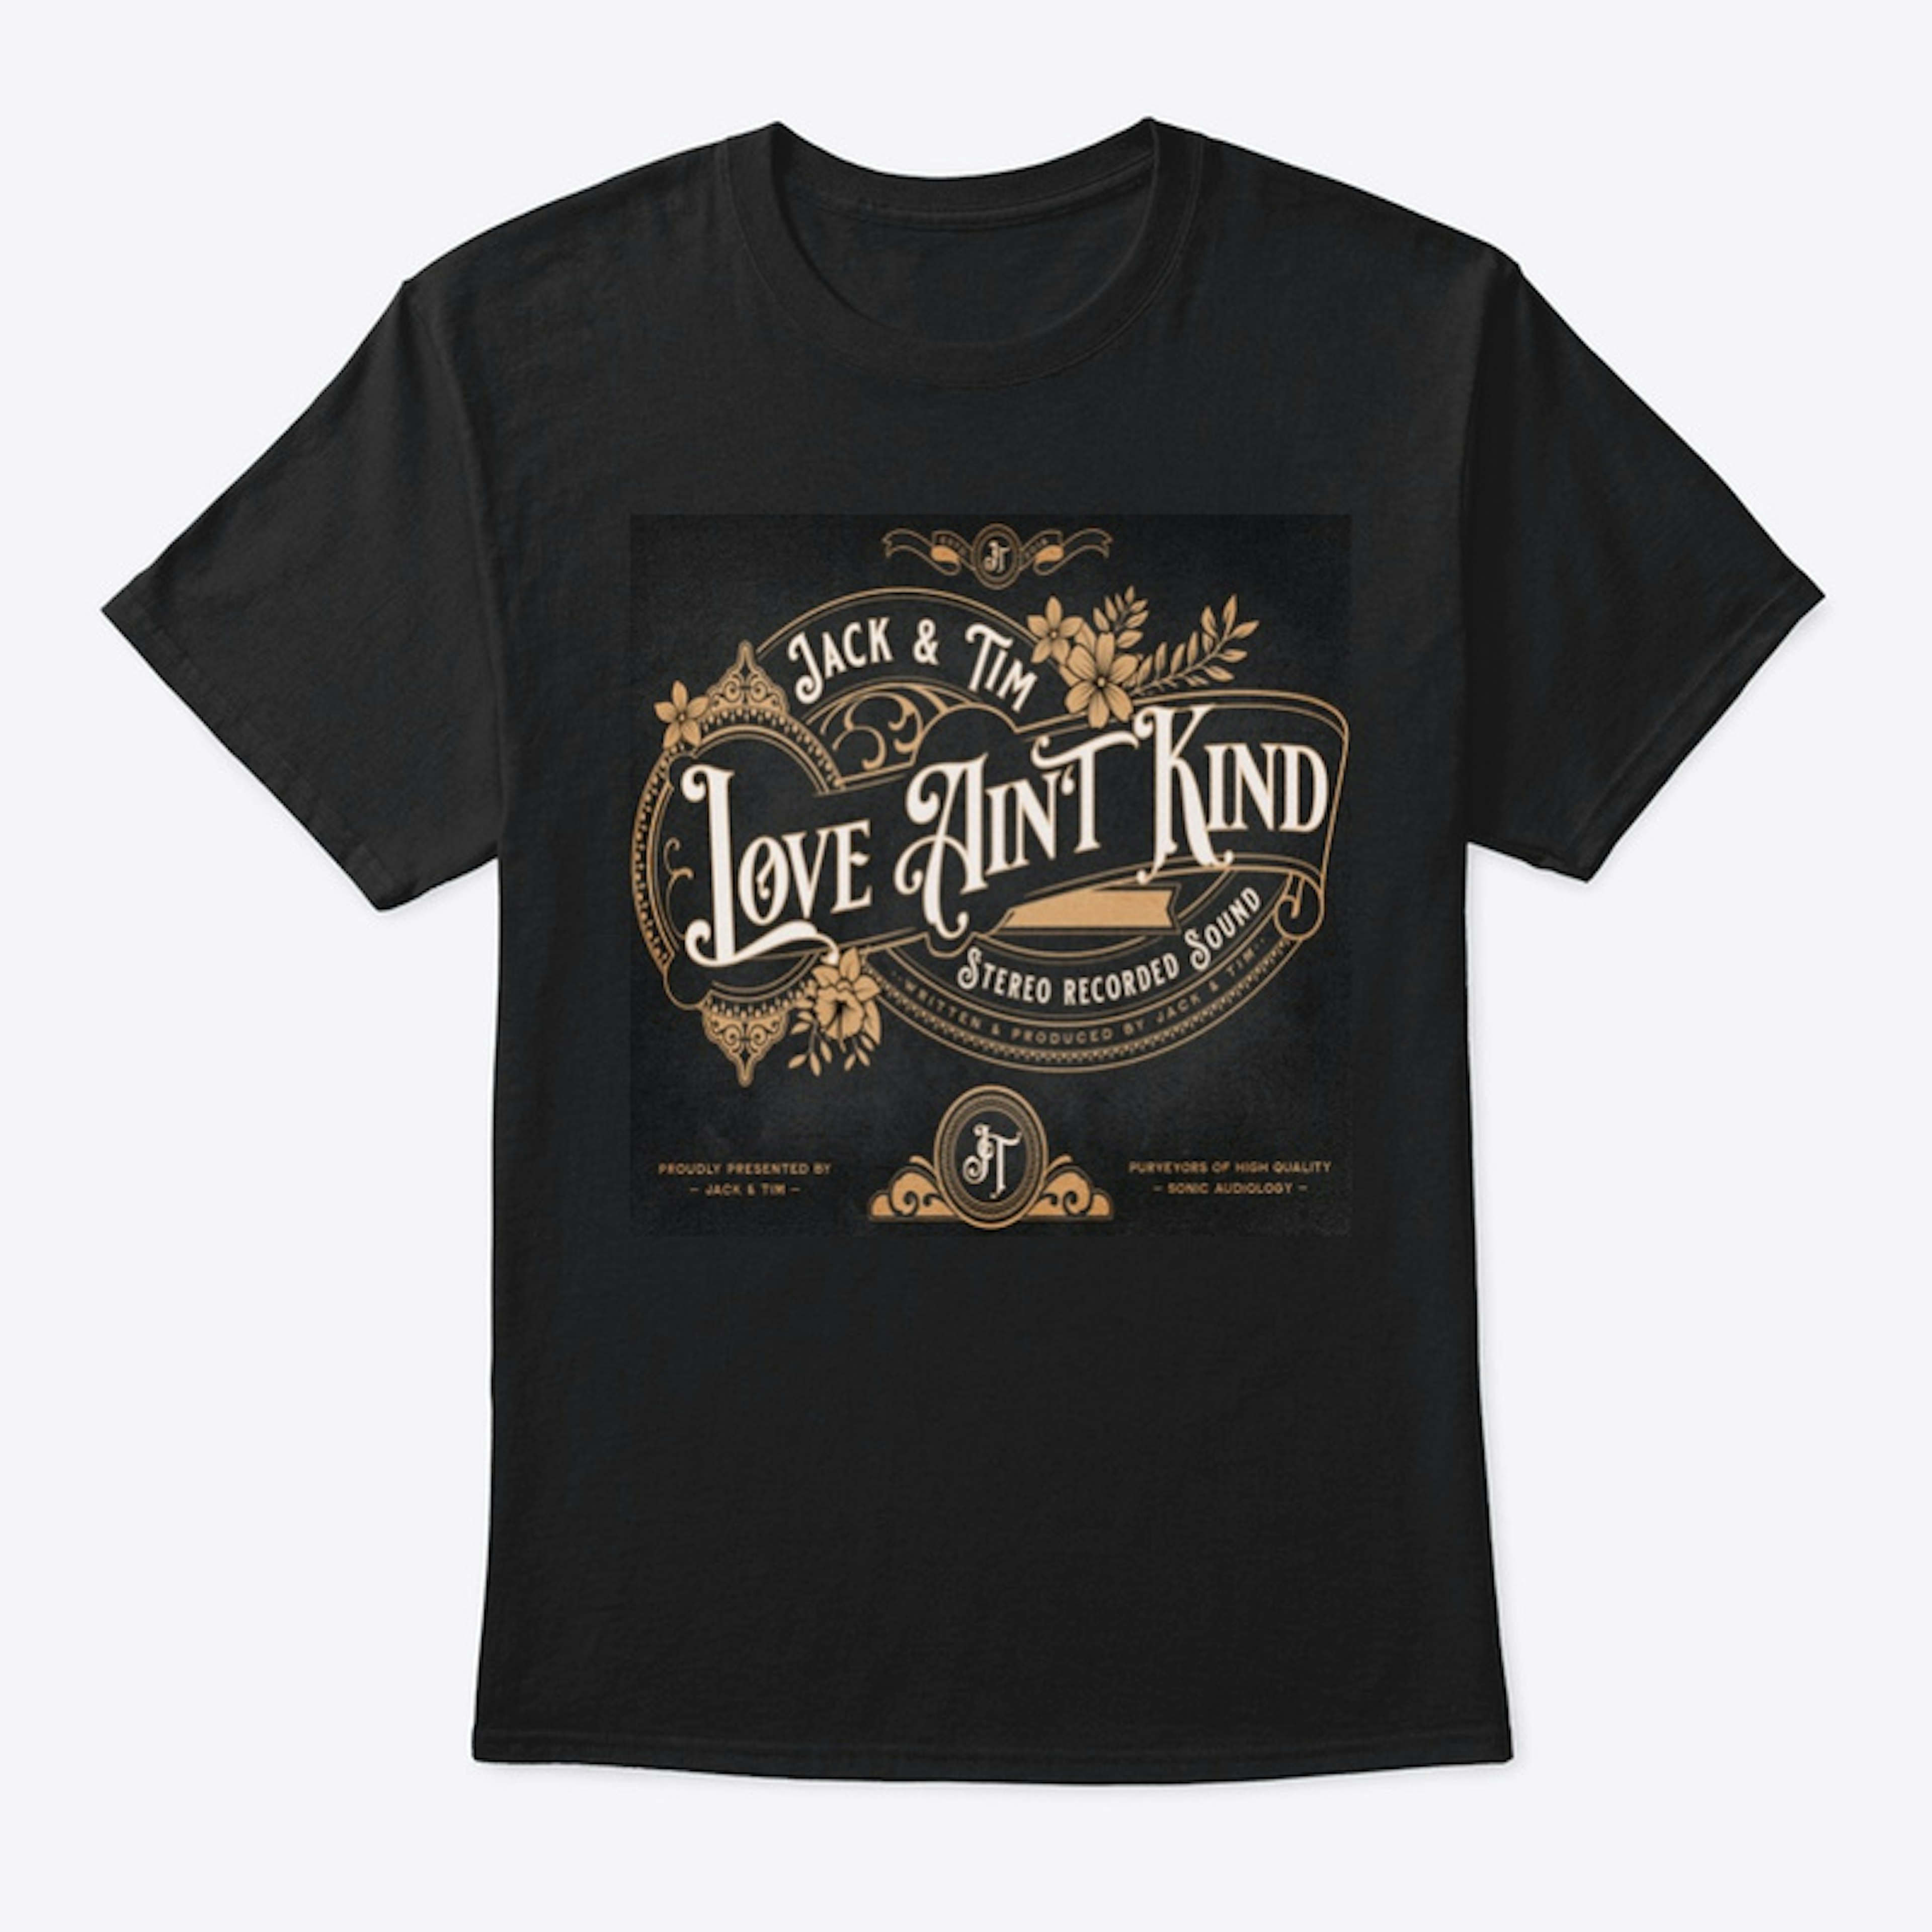 " Love Ain't Kind " Collection